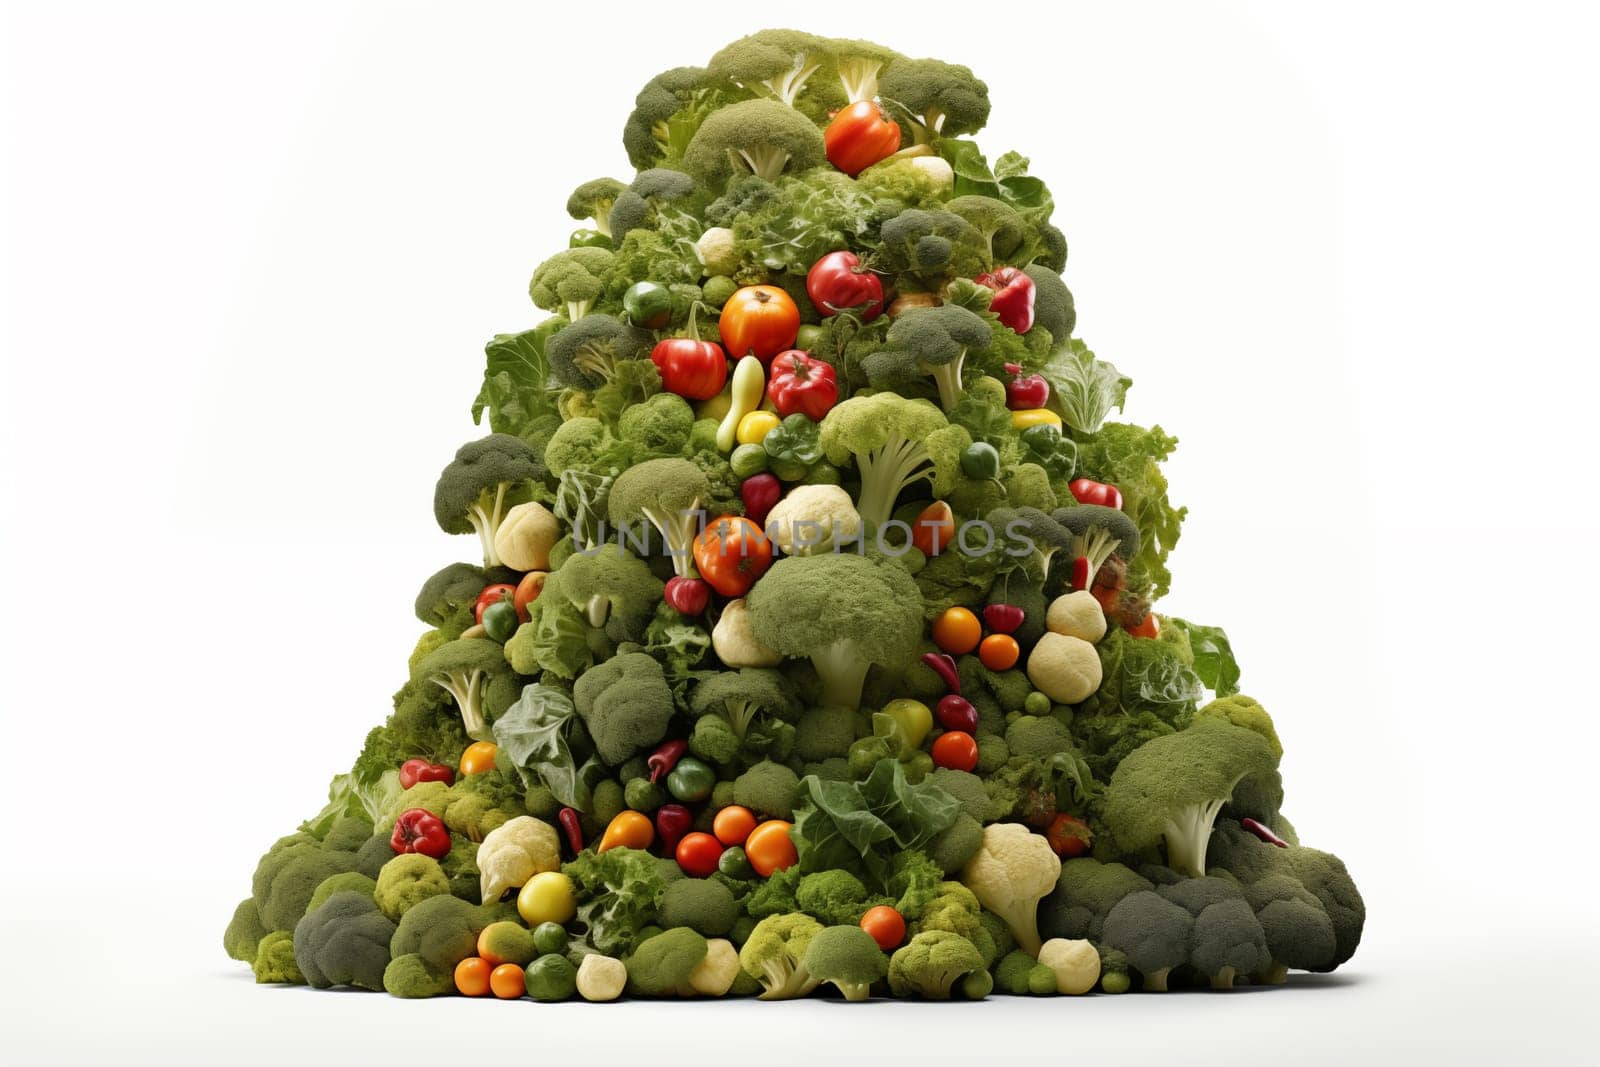 Creative Christmas tree made of vegetables in the shape of a pyramid,isolated on a white background